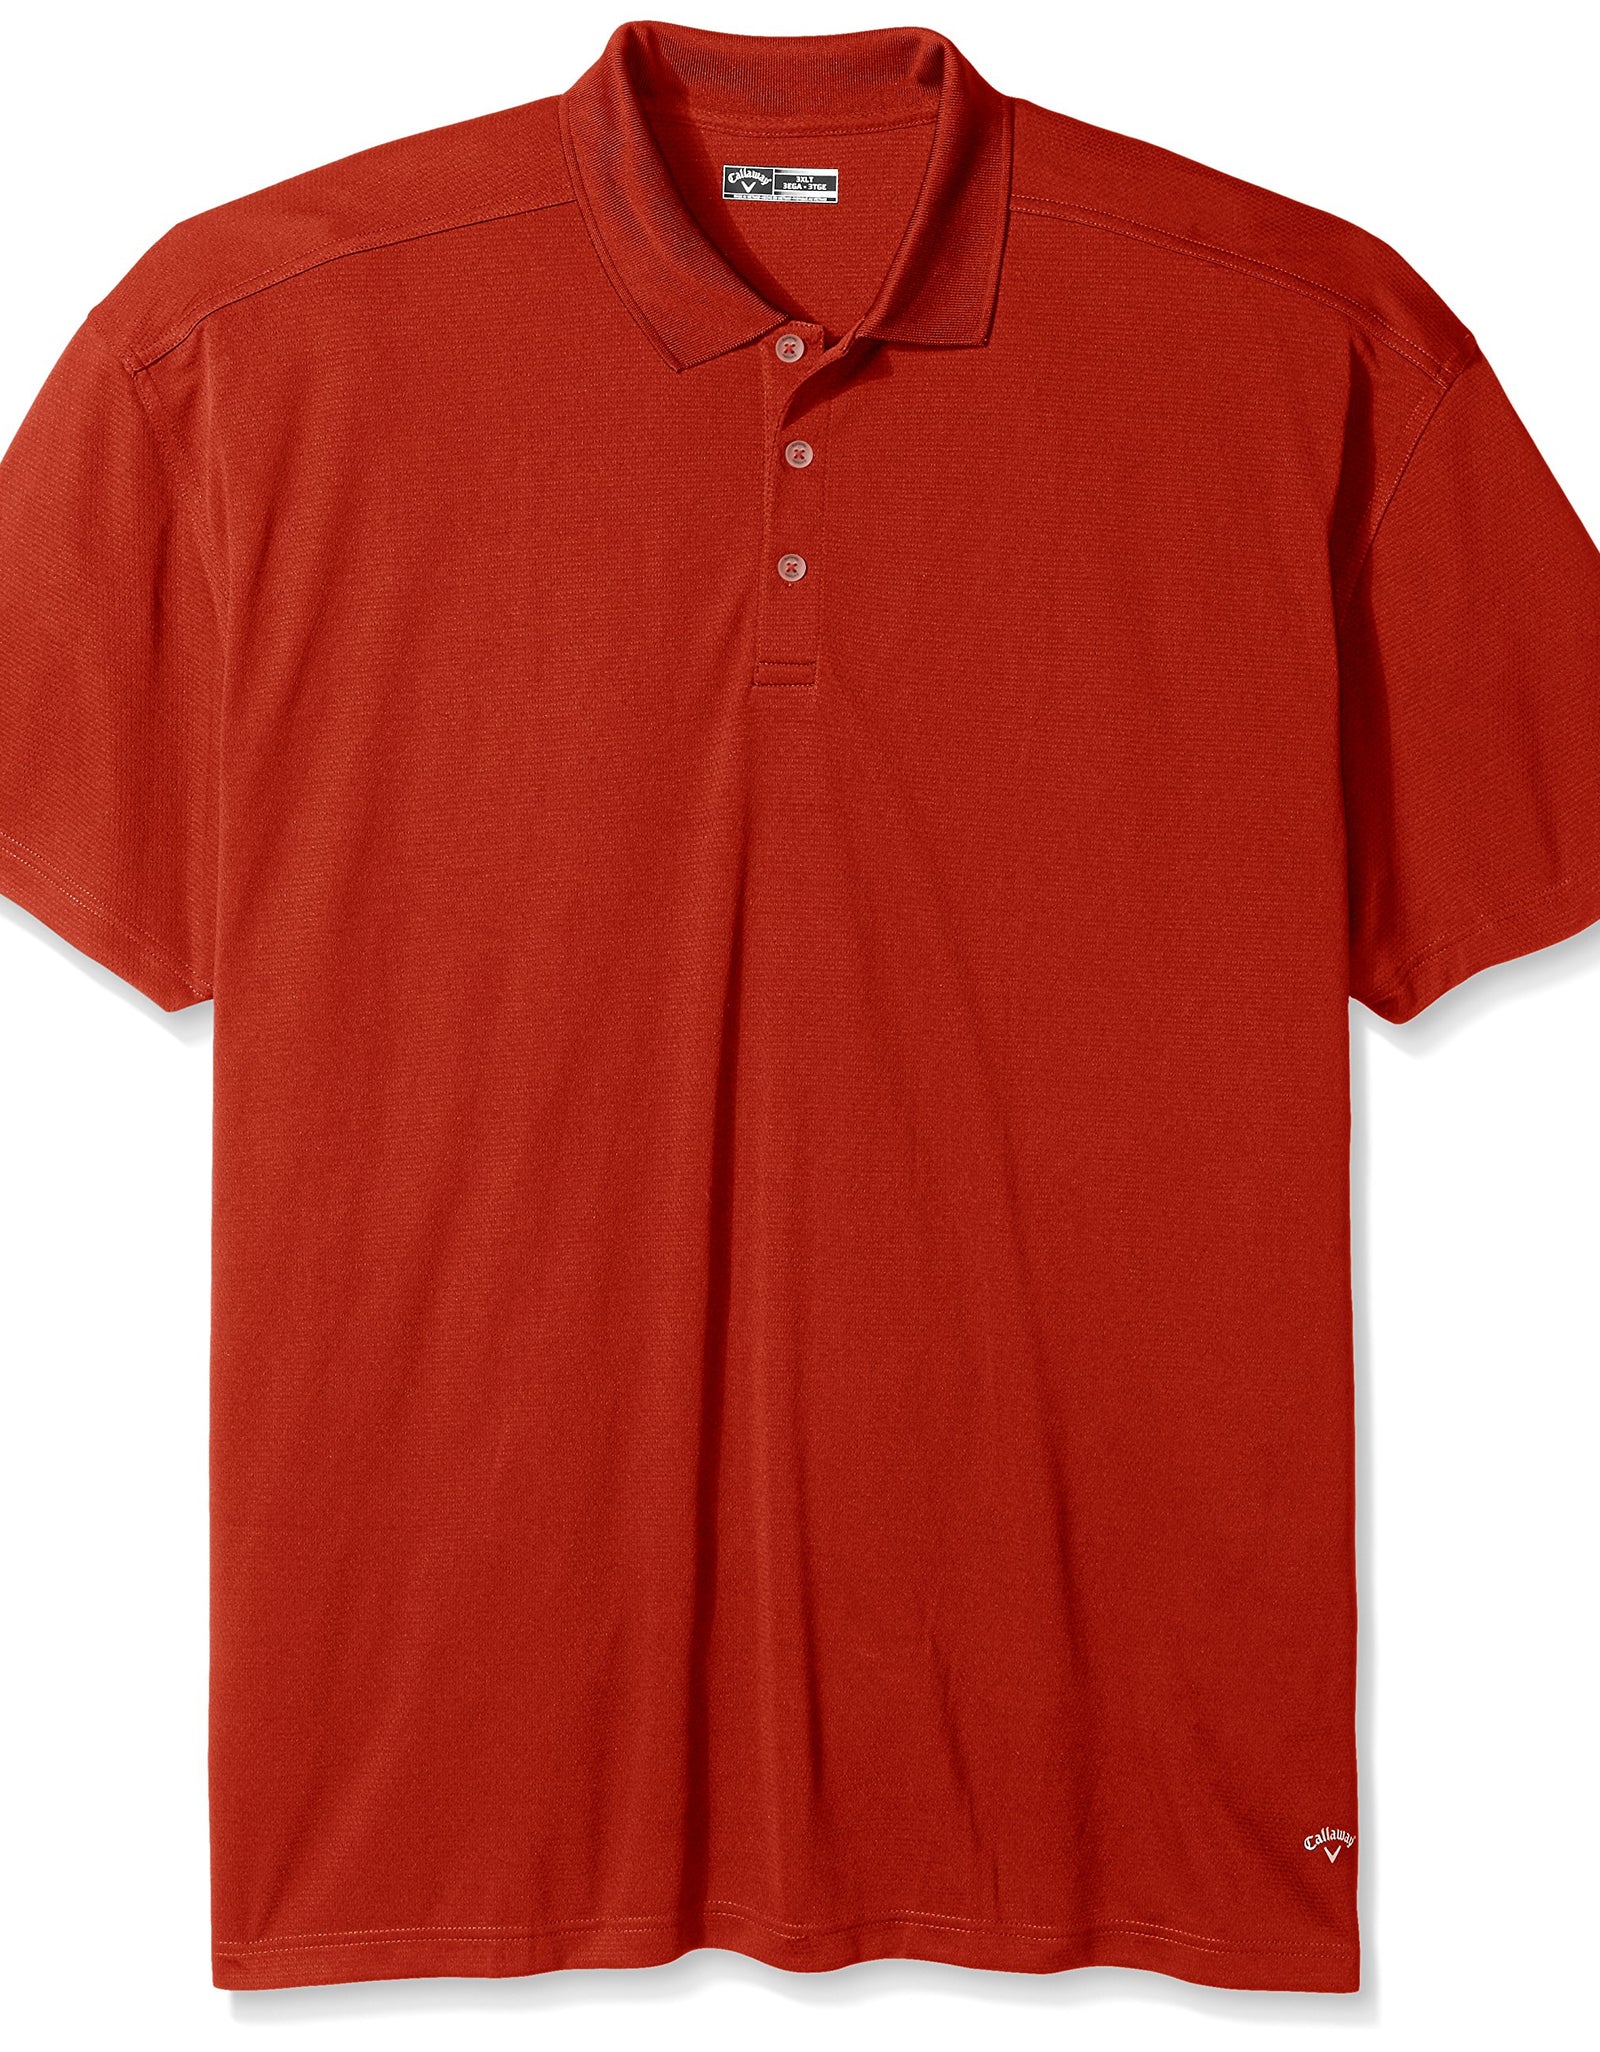 Callaway Men's Big and Tall Short Sleeve Core Performance Golf Polo Shirt with Sun Protection (Size Small-4X, Chili Pepper, 4X-Large Big Extra Tall